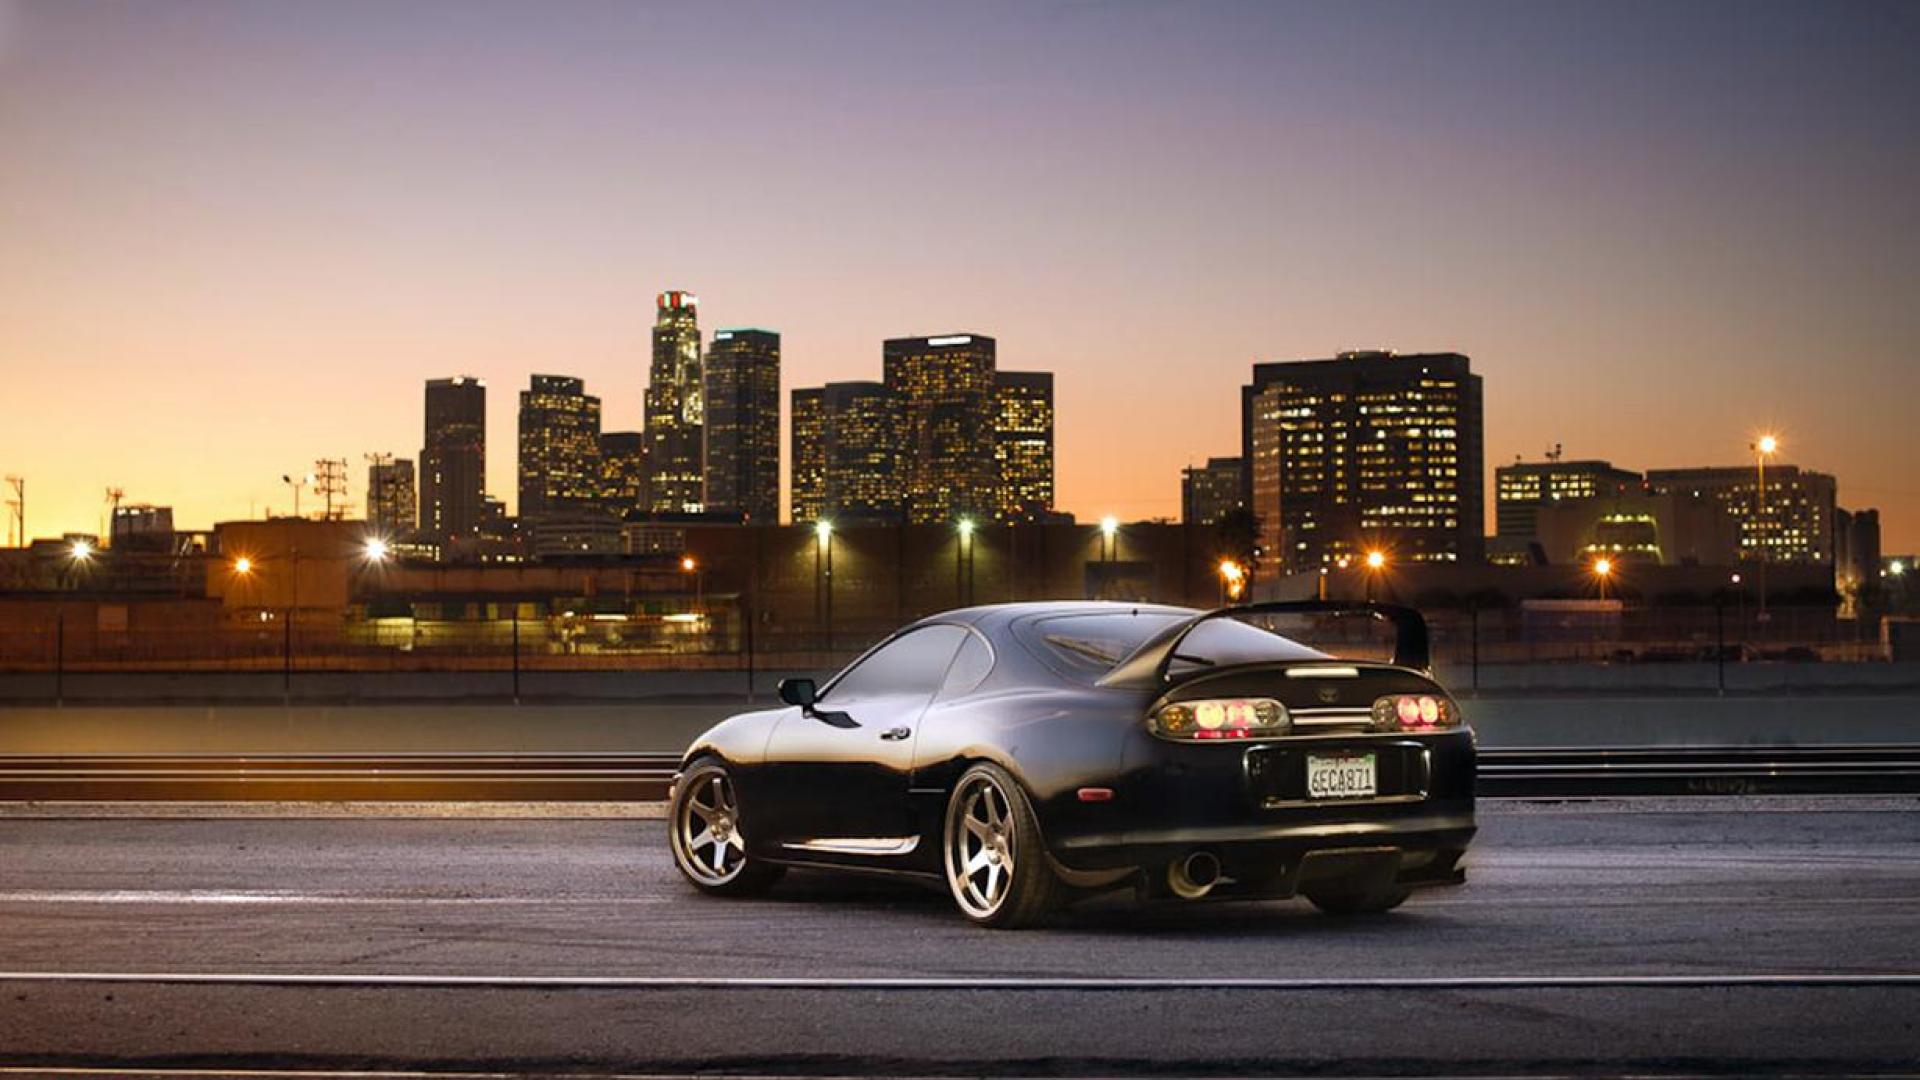 Toyota supra - (#146654) - High Quality and Resolution Wallpapers ...